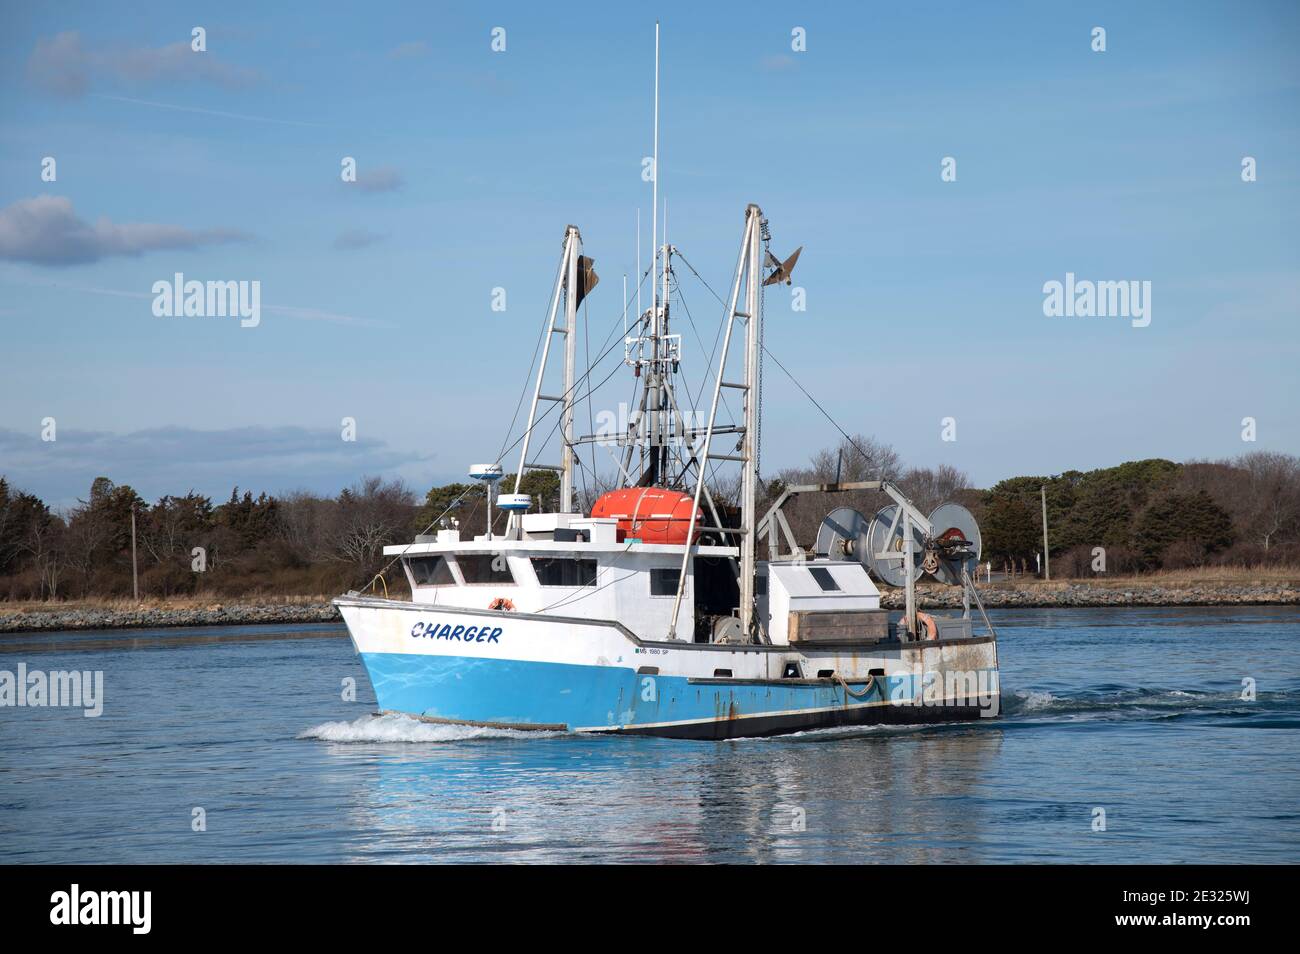 A fishing trawler passing through the Cape Cod Canal in Sandwich, Massachusetts. Stock Photo